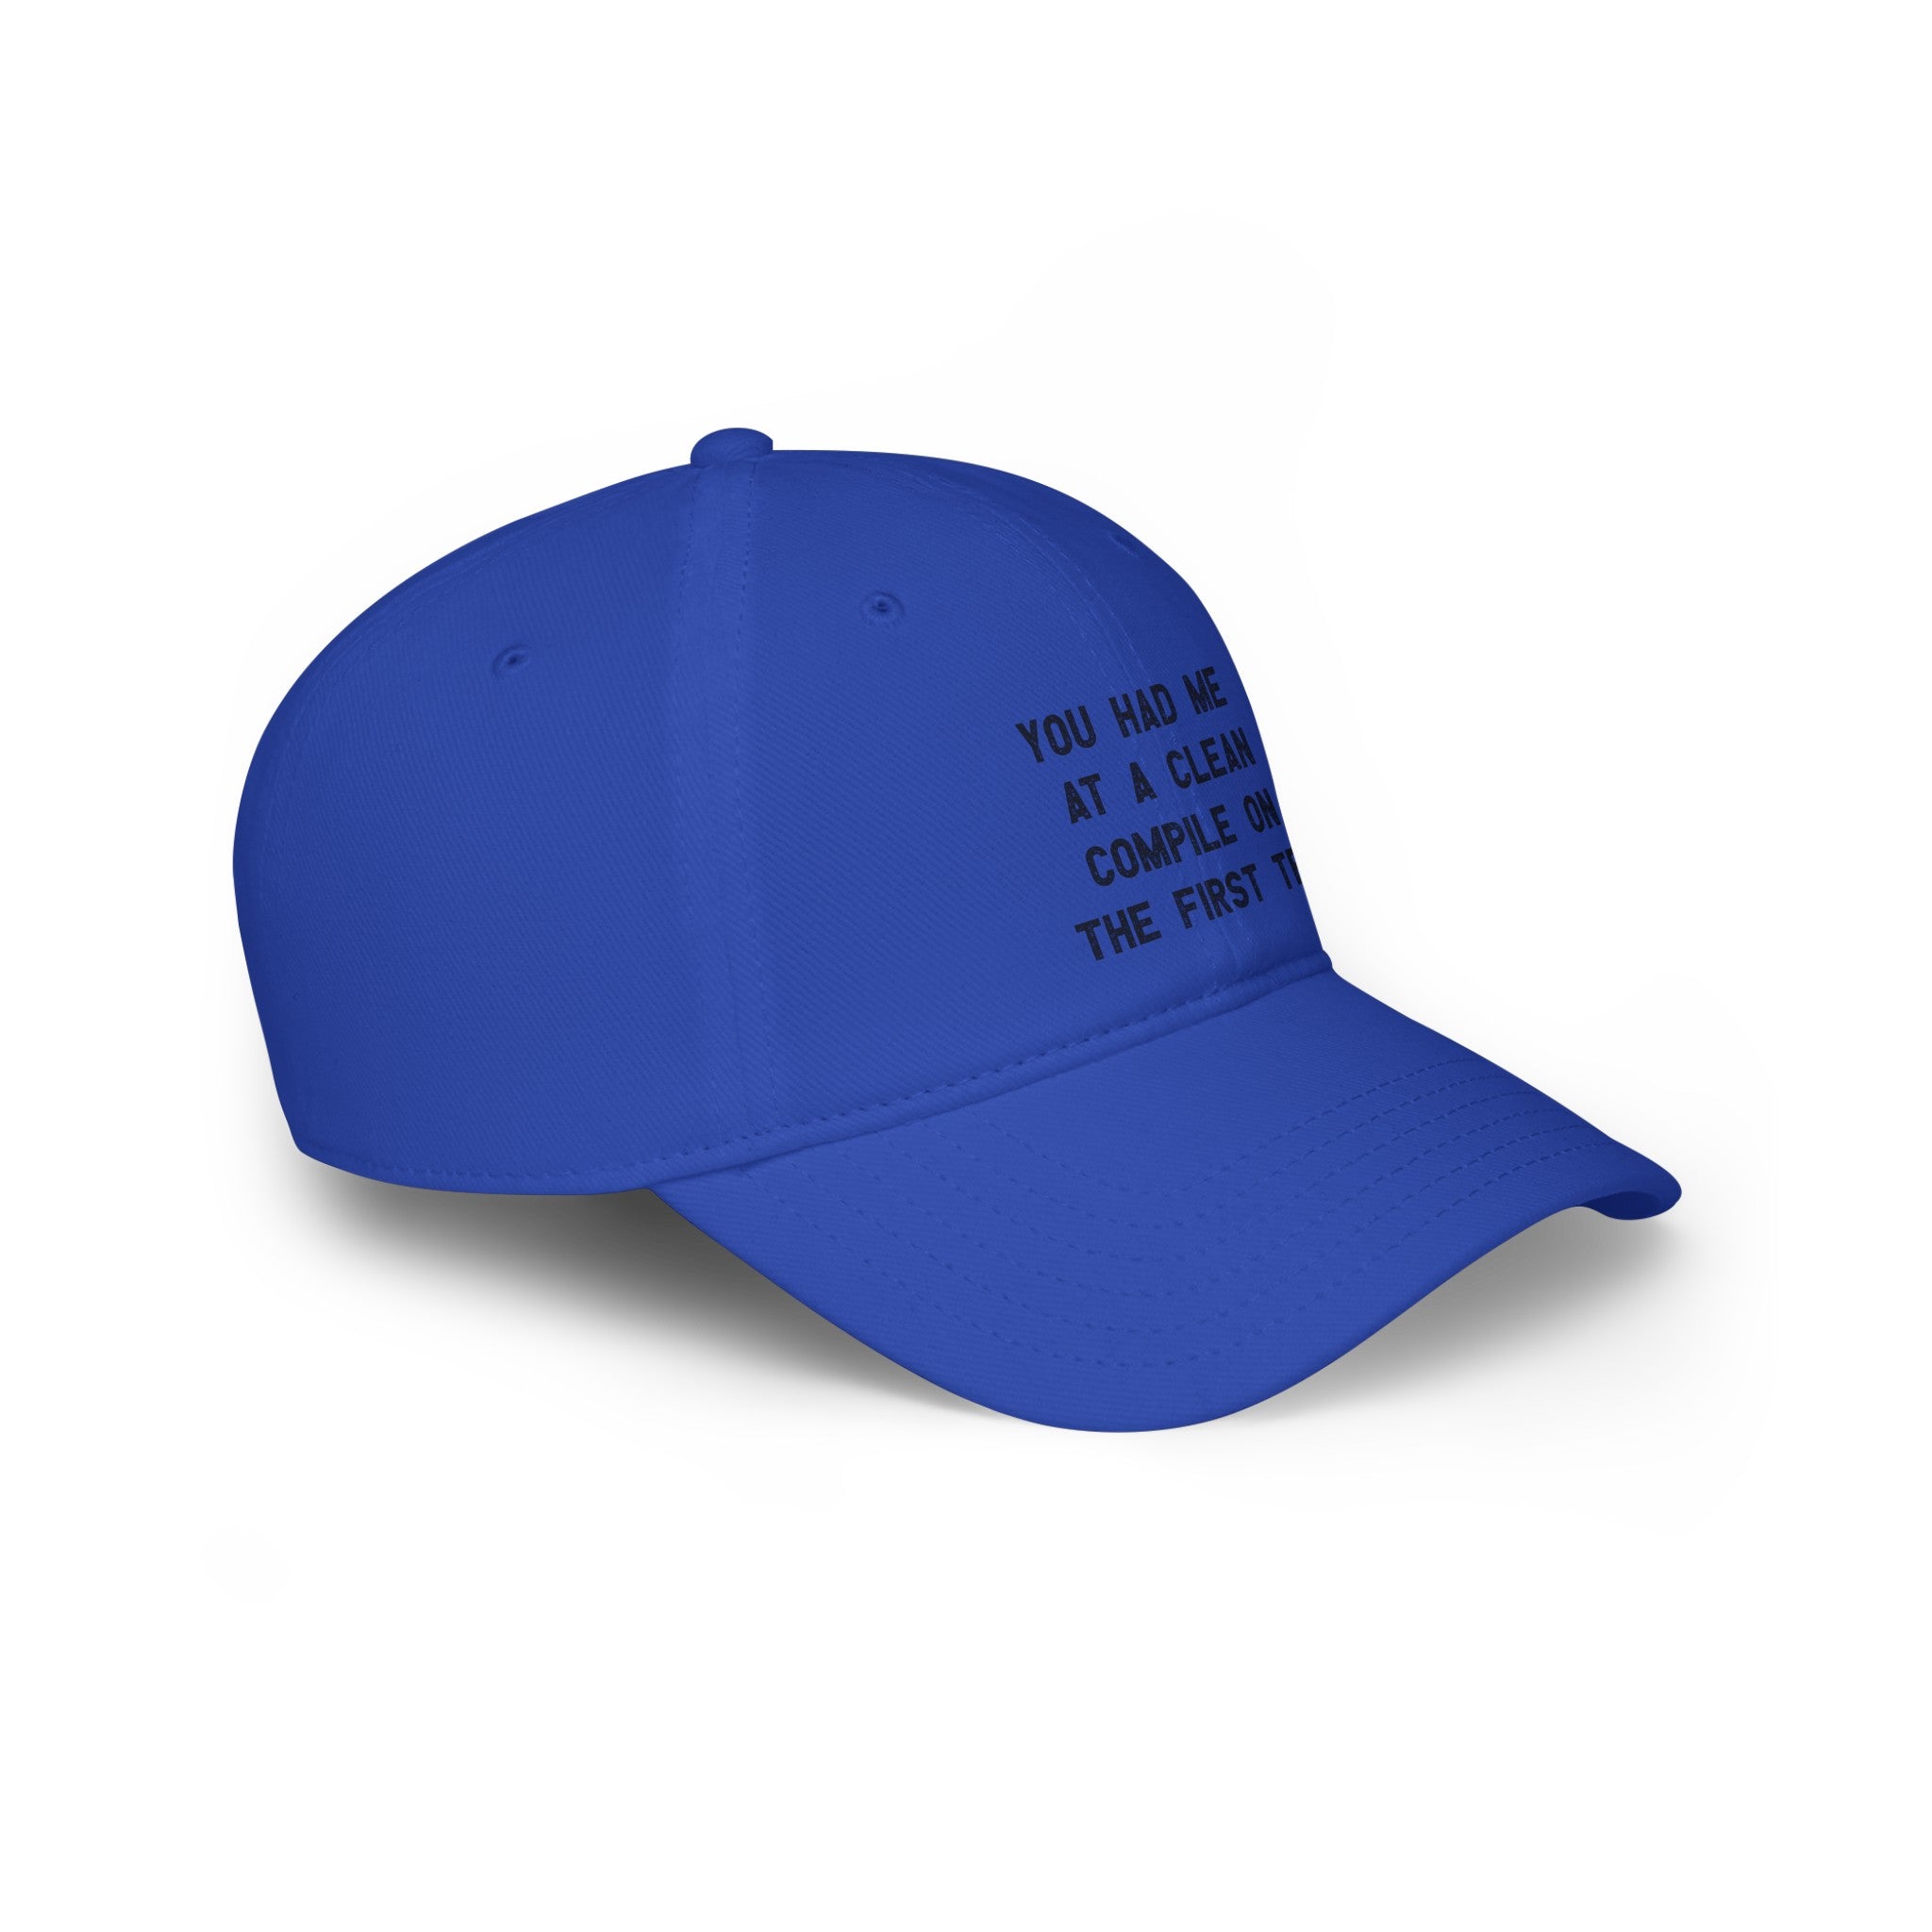 Blue baseball cap with black text on the front panel that reads, "YOU HAD ME AT A CLEAN COMPILE ON THE FIRST TRY." Perfect for those who appreciate coder lingo.